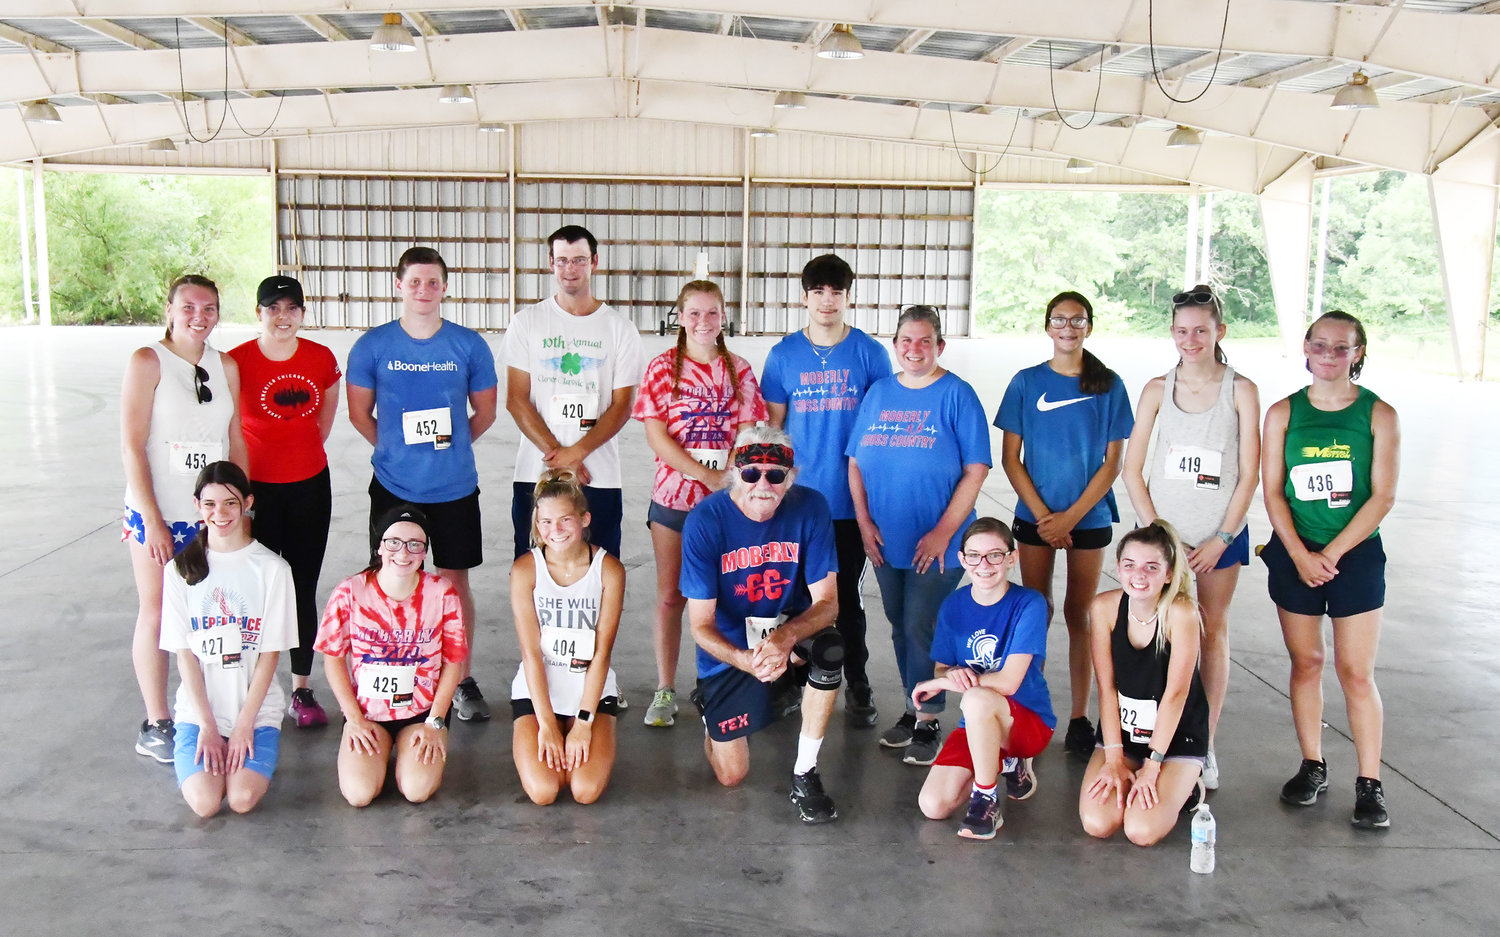 Moberly High School runners past and present competed in the Independence Day 5K run, gathering for a photo after the race inside Riley Pavilion.